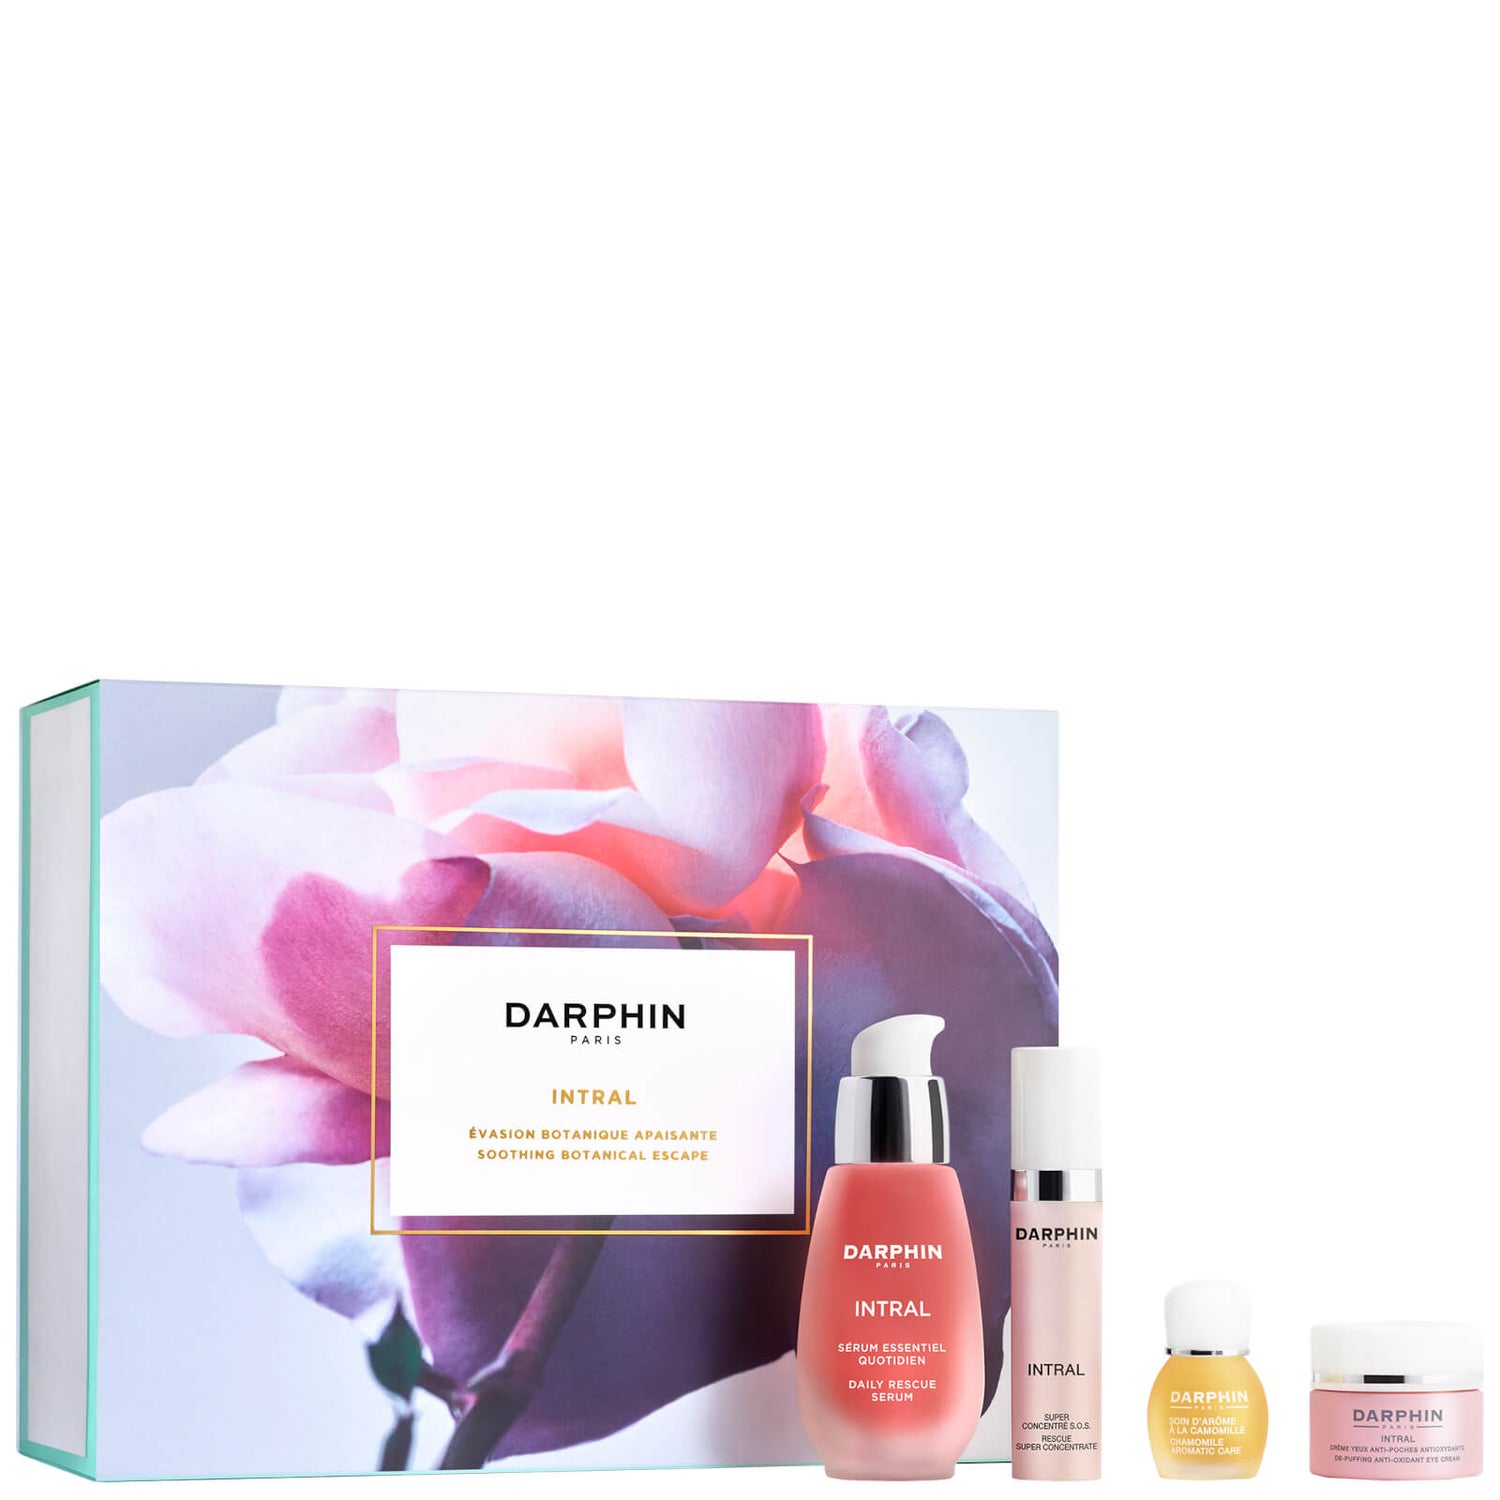 Darphin Intral Redness Relief Soothing Serum - Holiday (în valoare de 108,00 €)